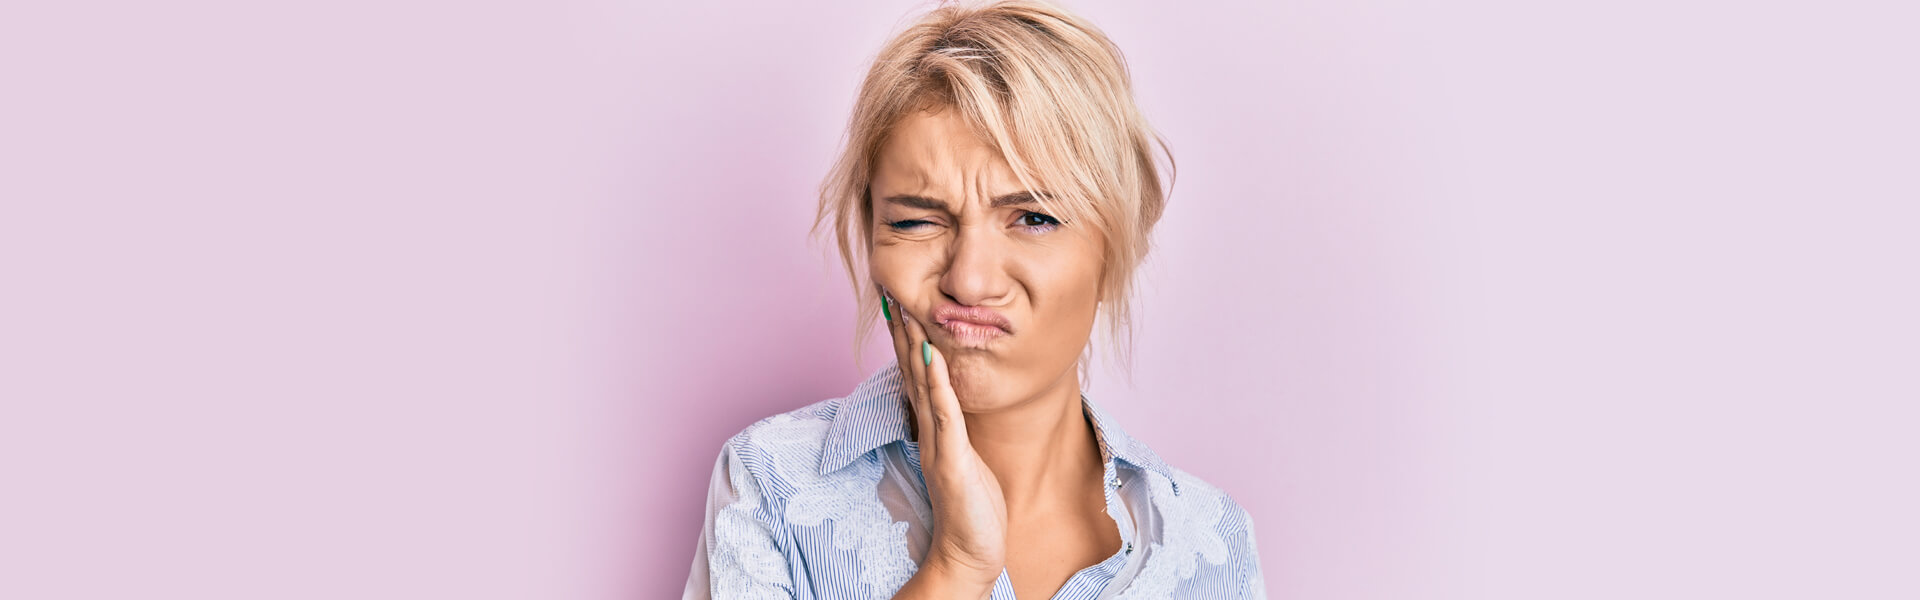 Is Dental Crown Painful? How Long Do Crowns Last on Teeth?